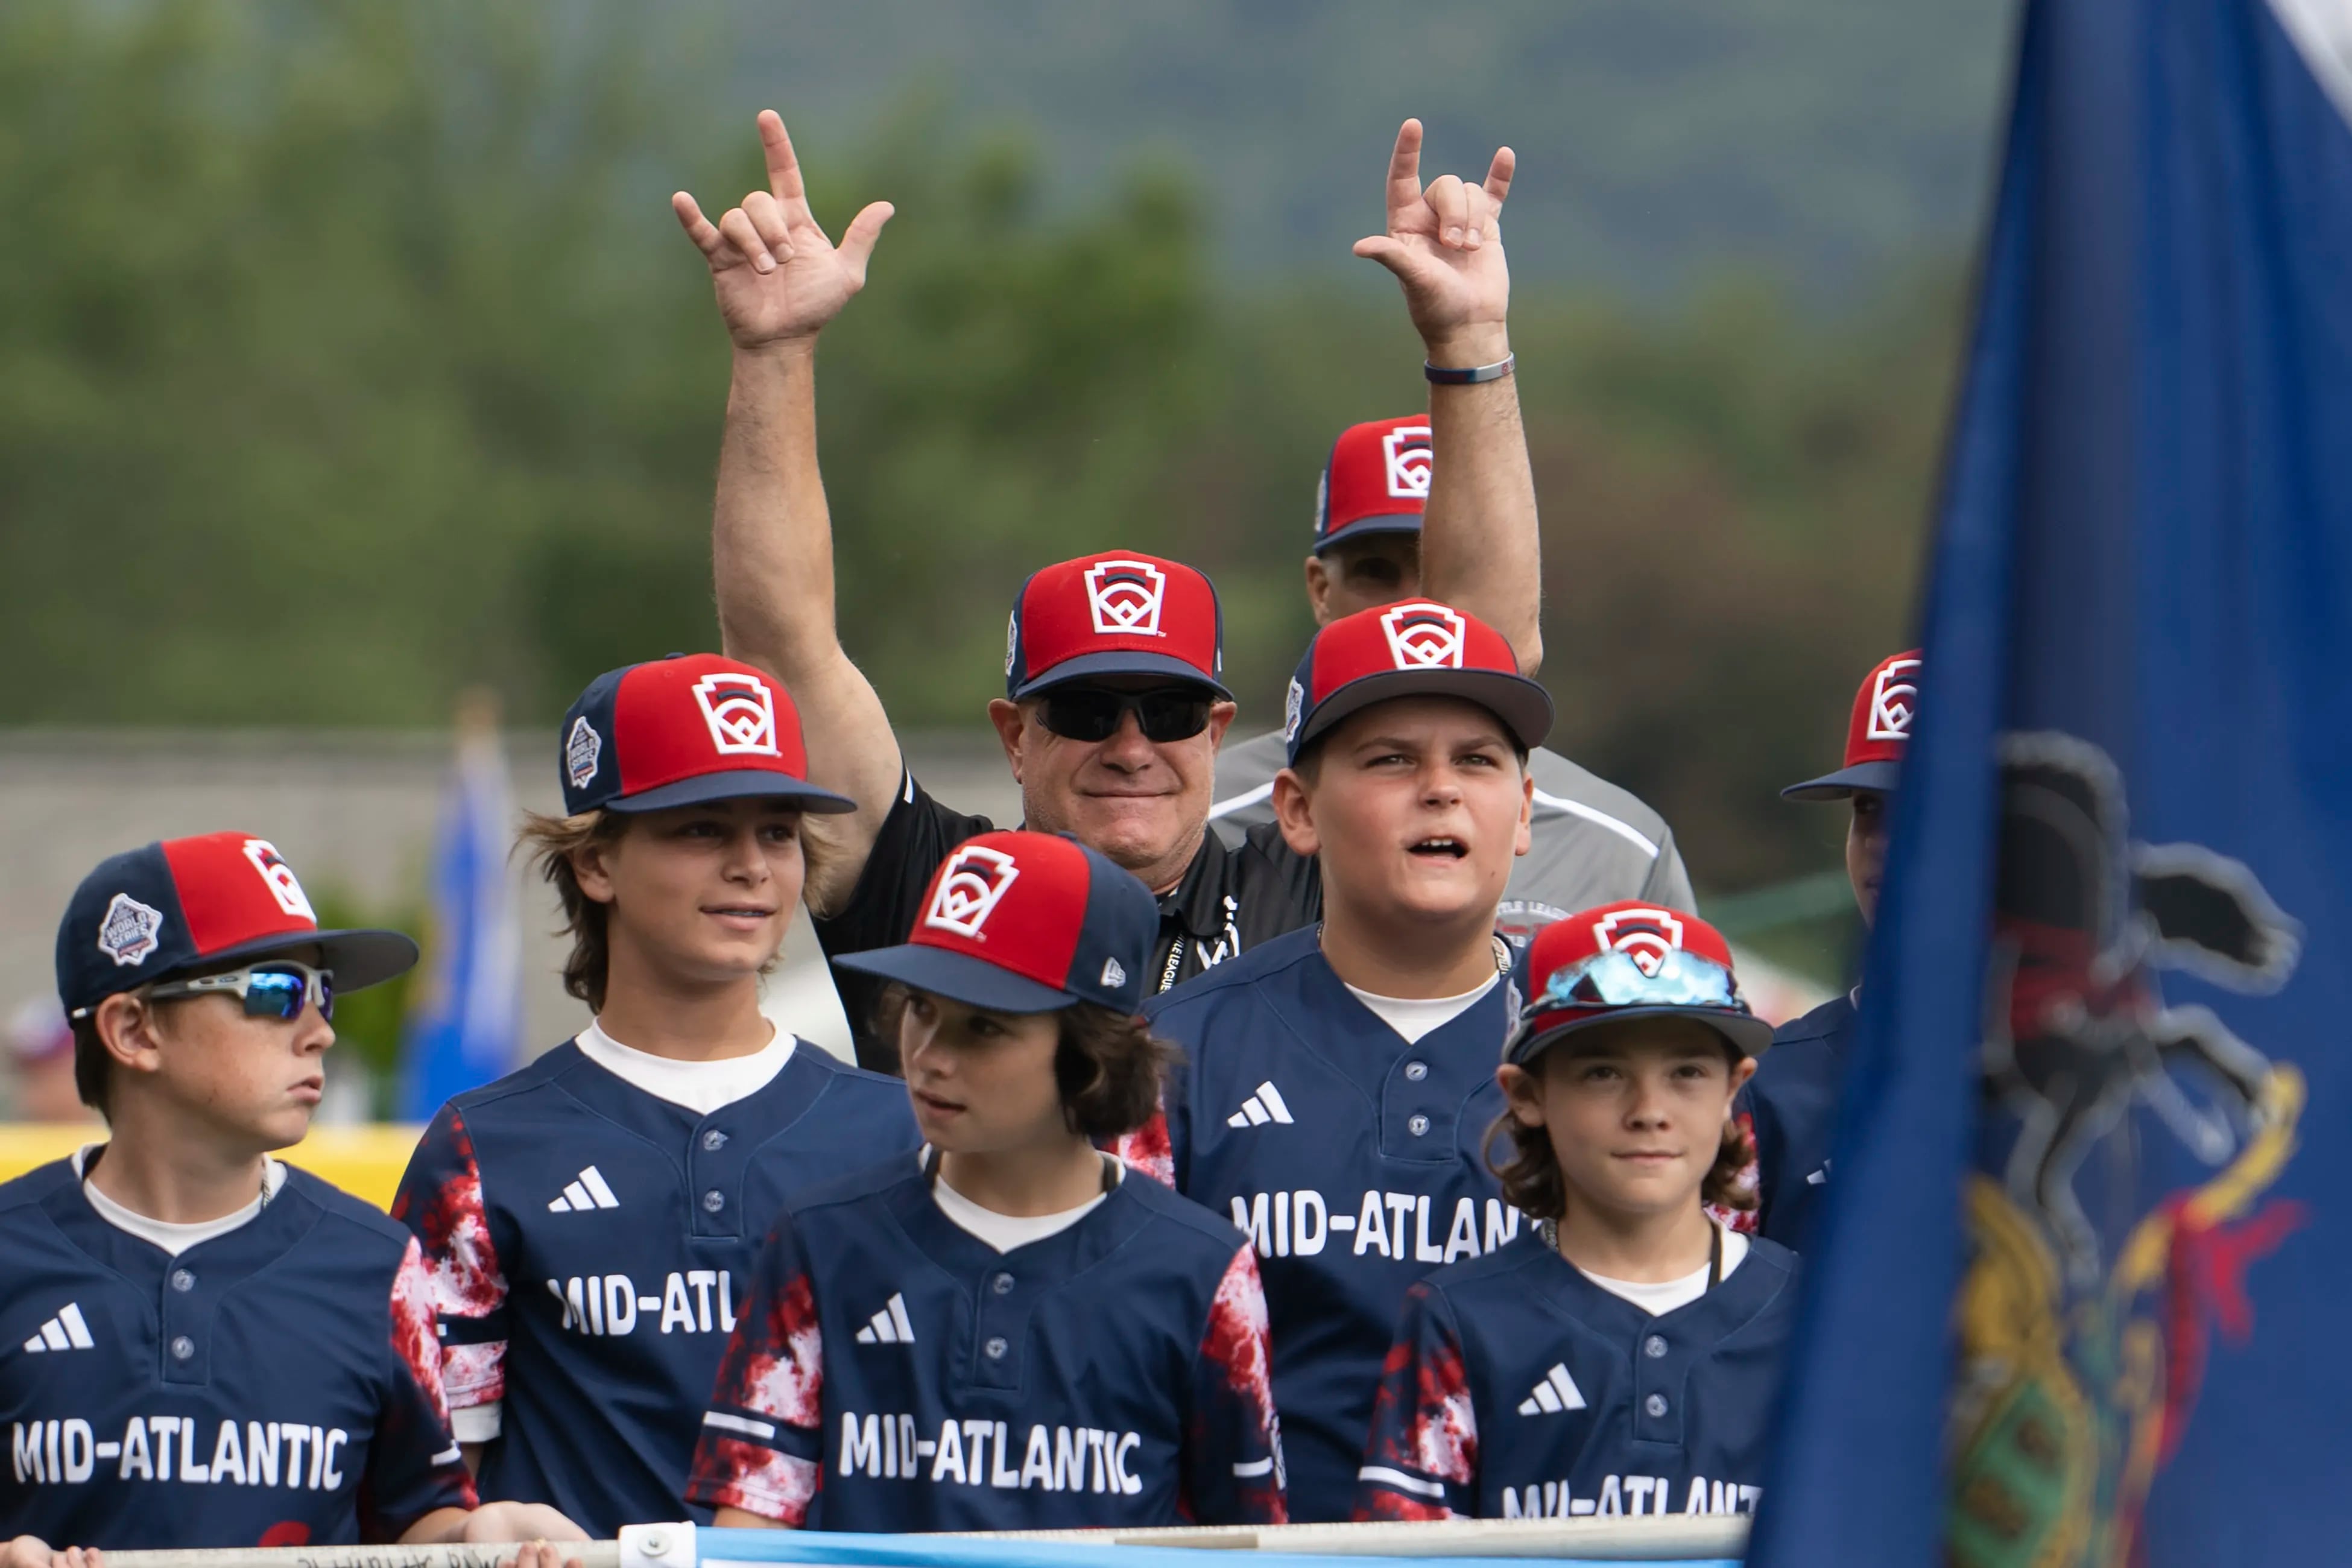 Photos of the 2023 Little League Baseball World Series Opening Ceremony